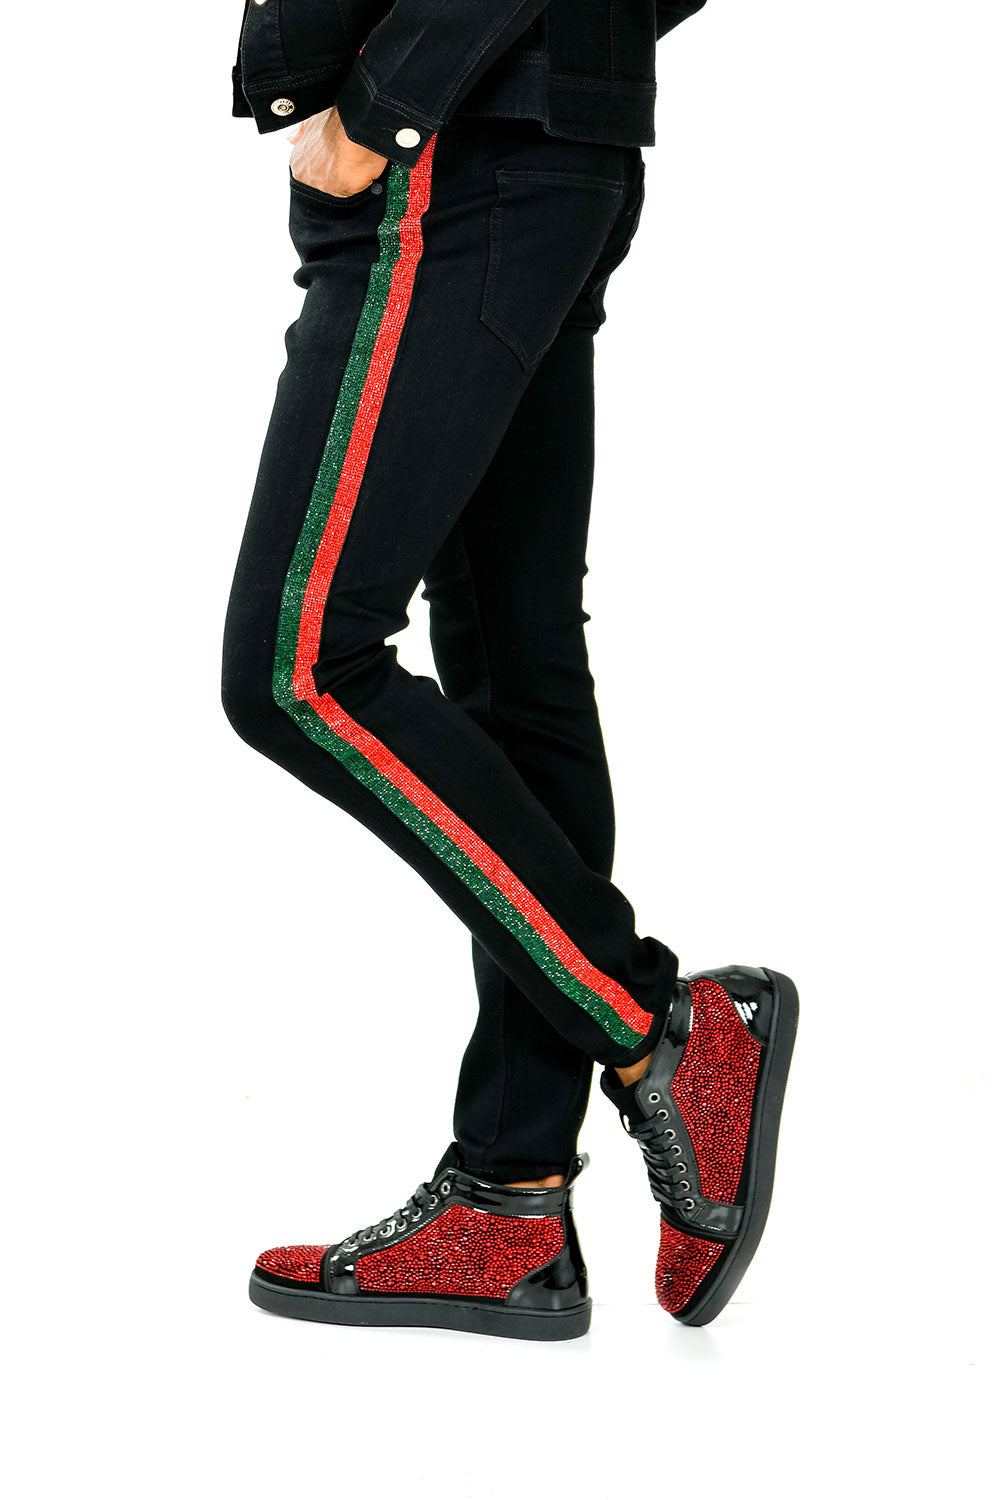 men's green and red rhinestone jeans side